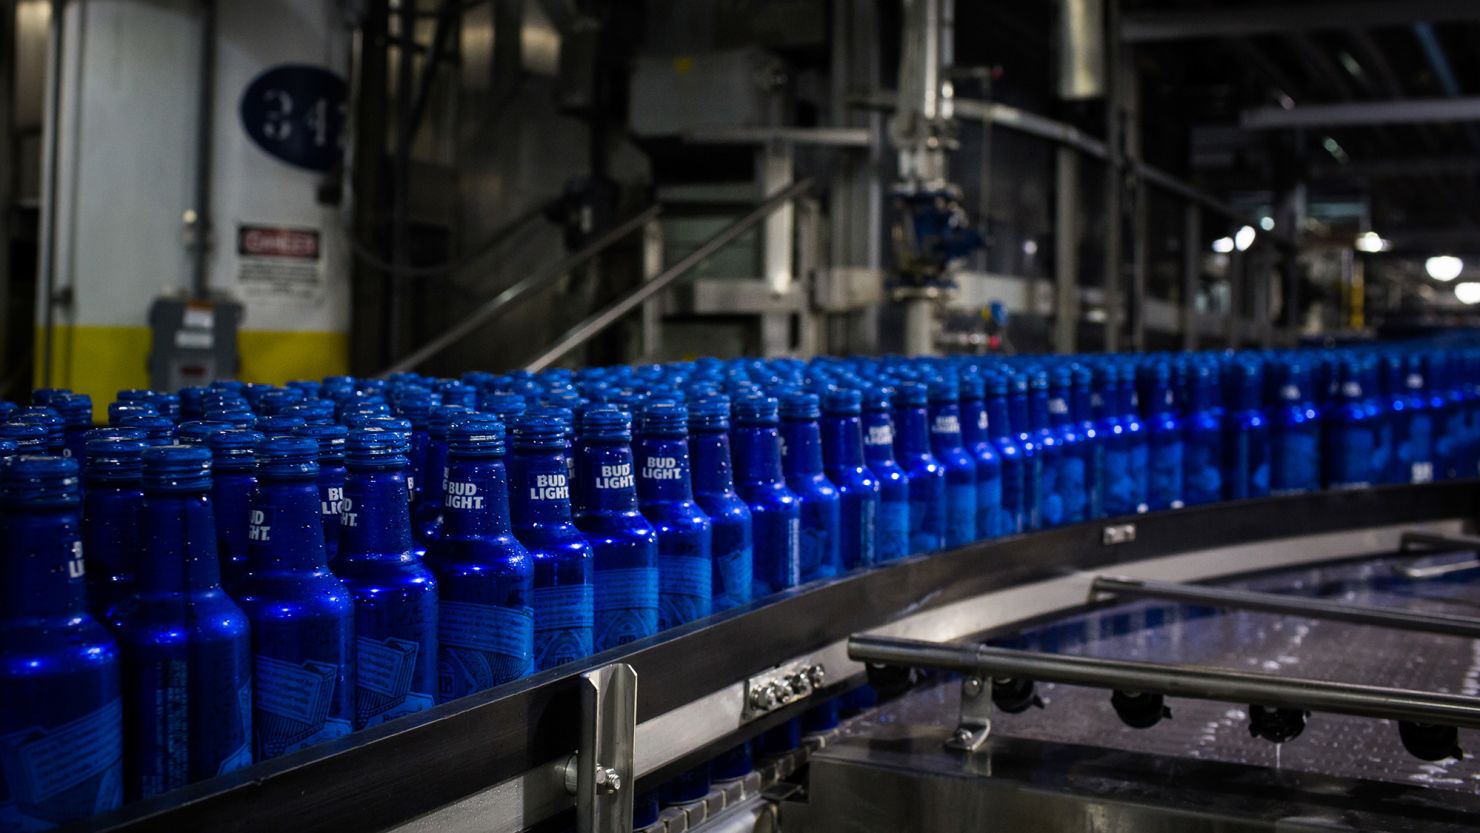 Bottles of Bud Light beer move along a conveyor at an Anheuser-Busch InBev facility in St. Louis, Missouri, United States, in July 2018.